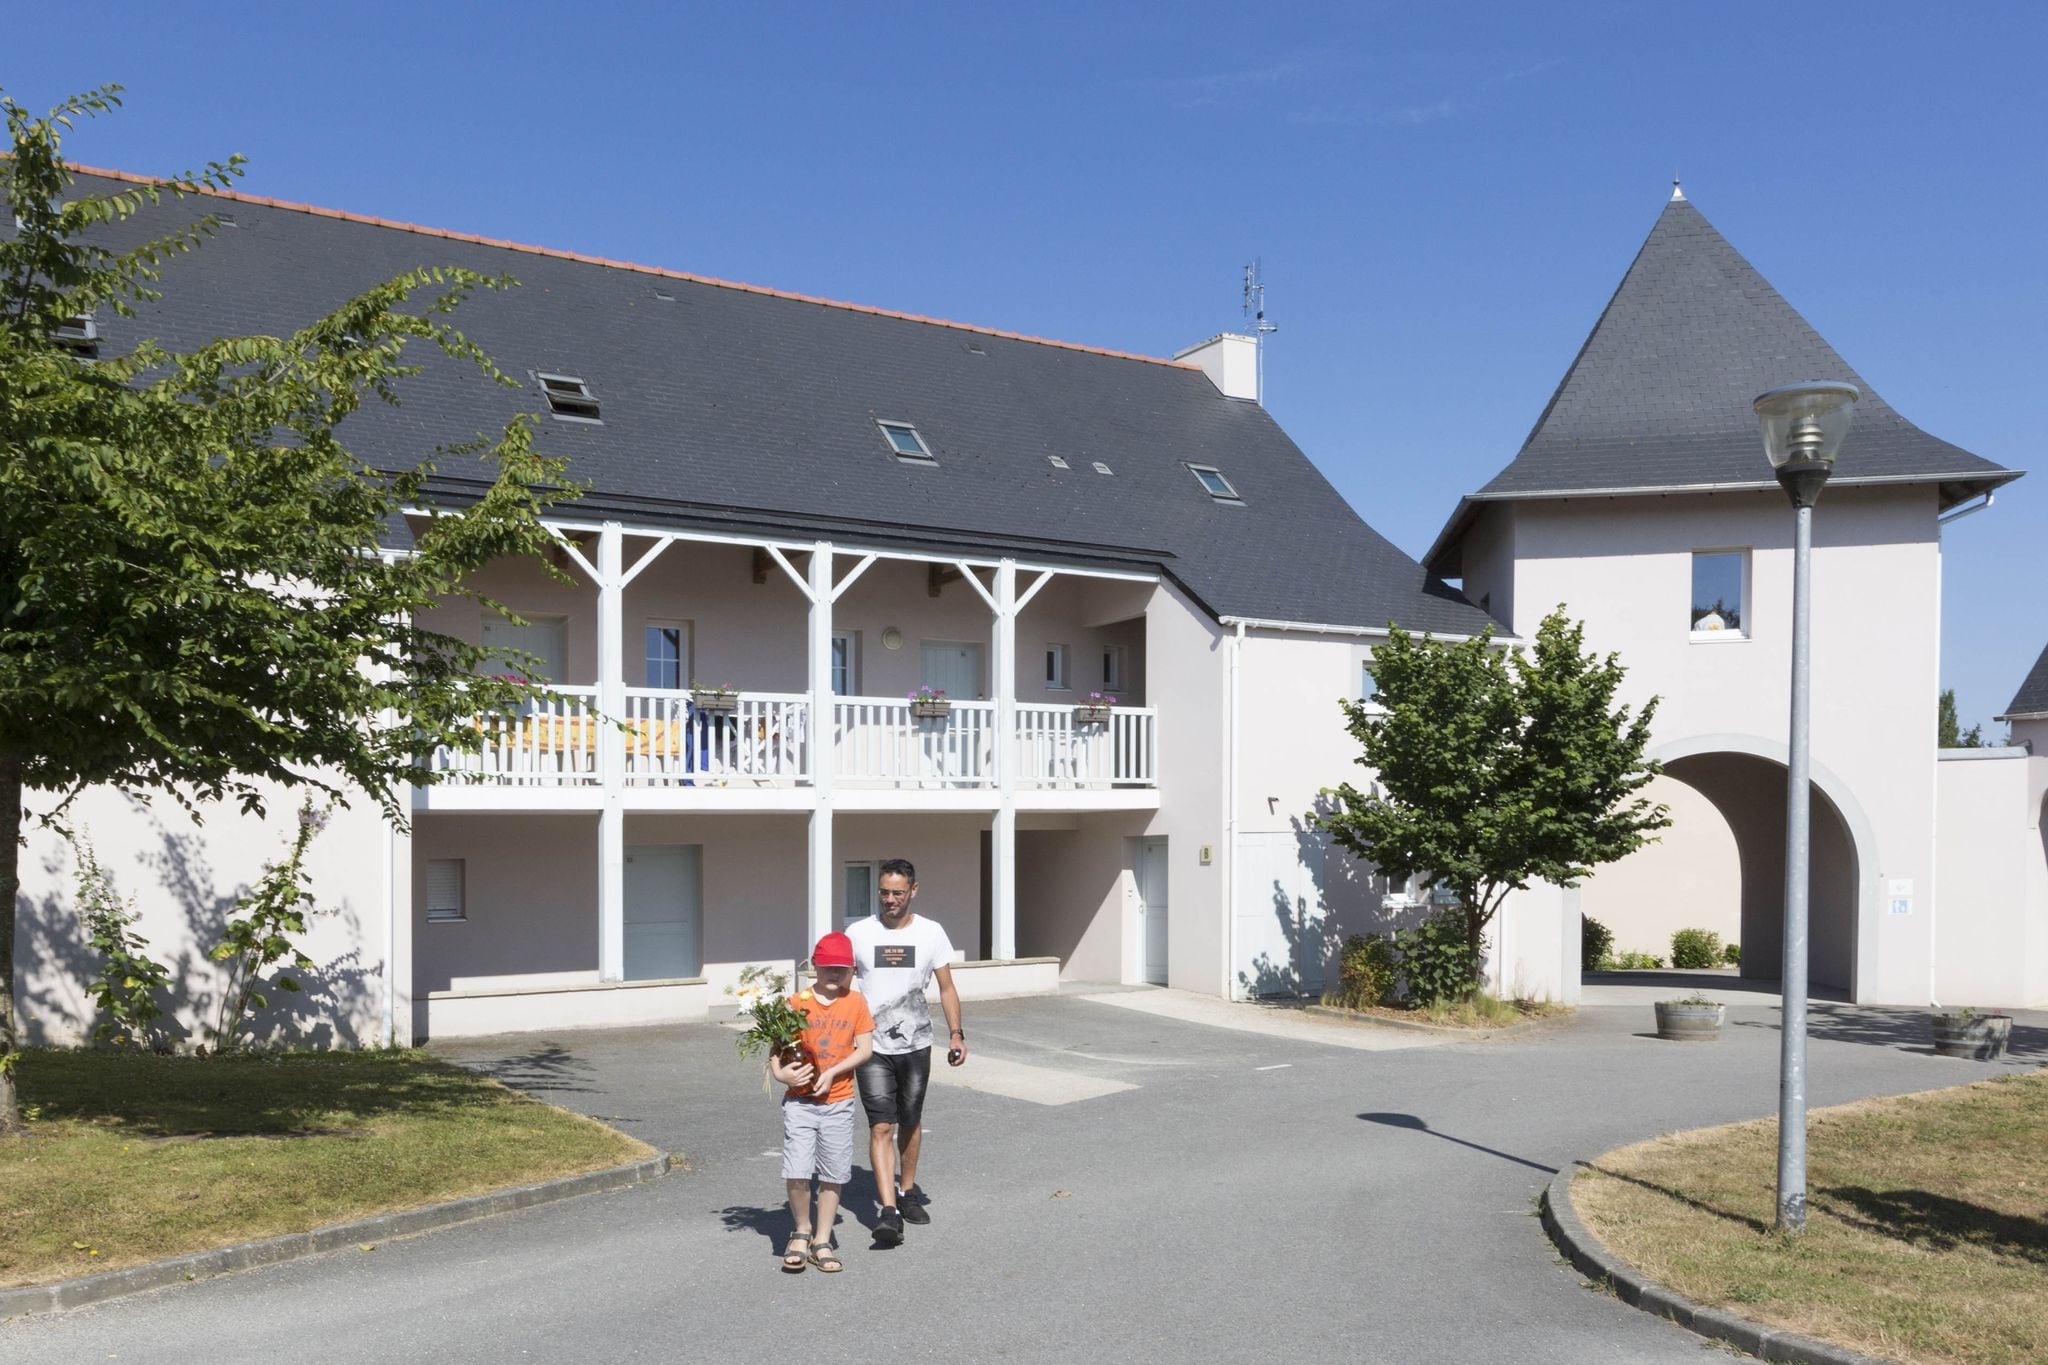 Semi-detached holiday home in beautiful historic Brittany